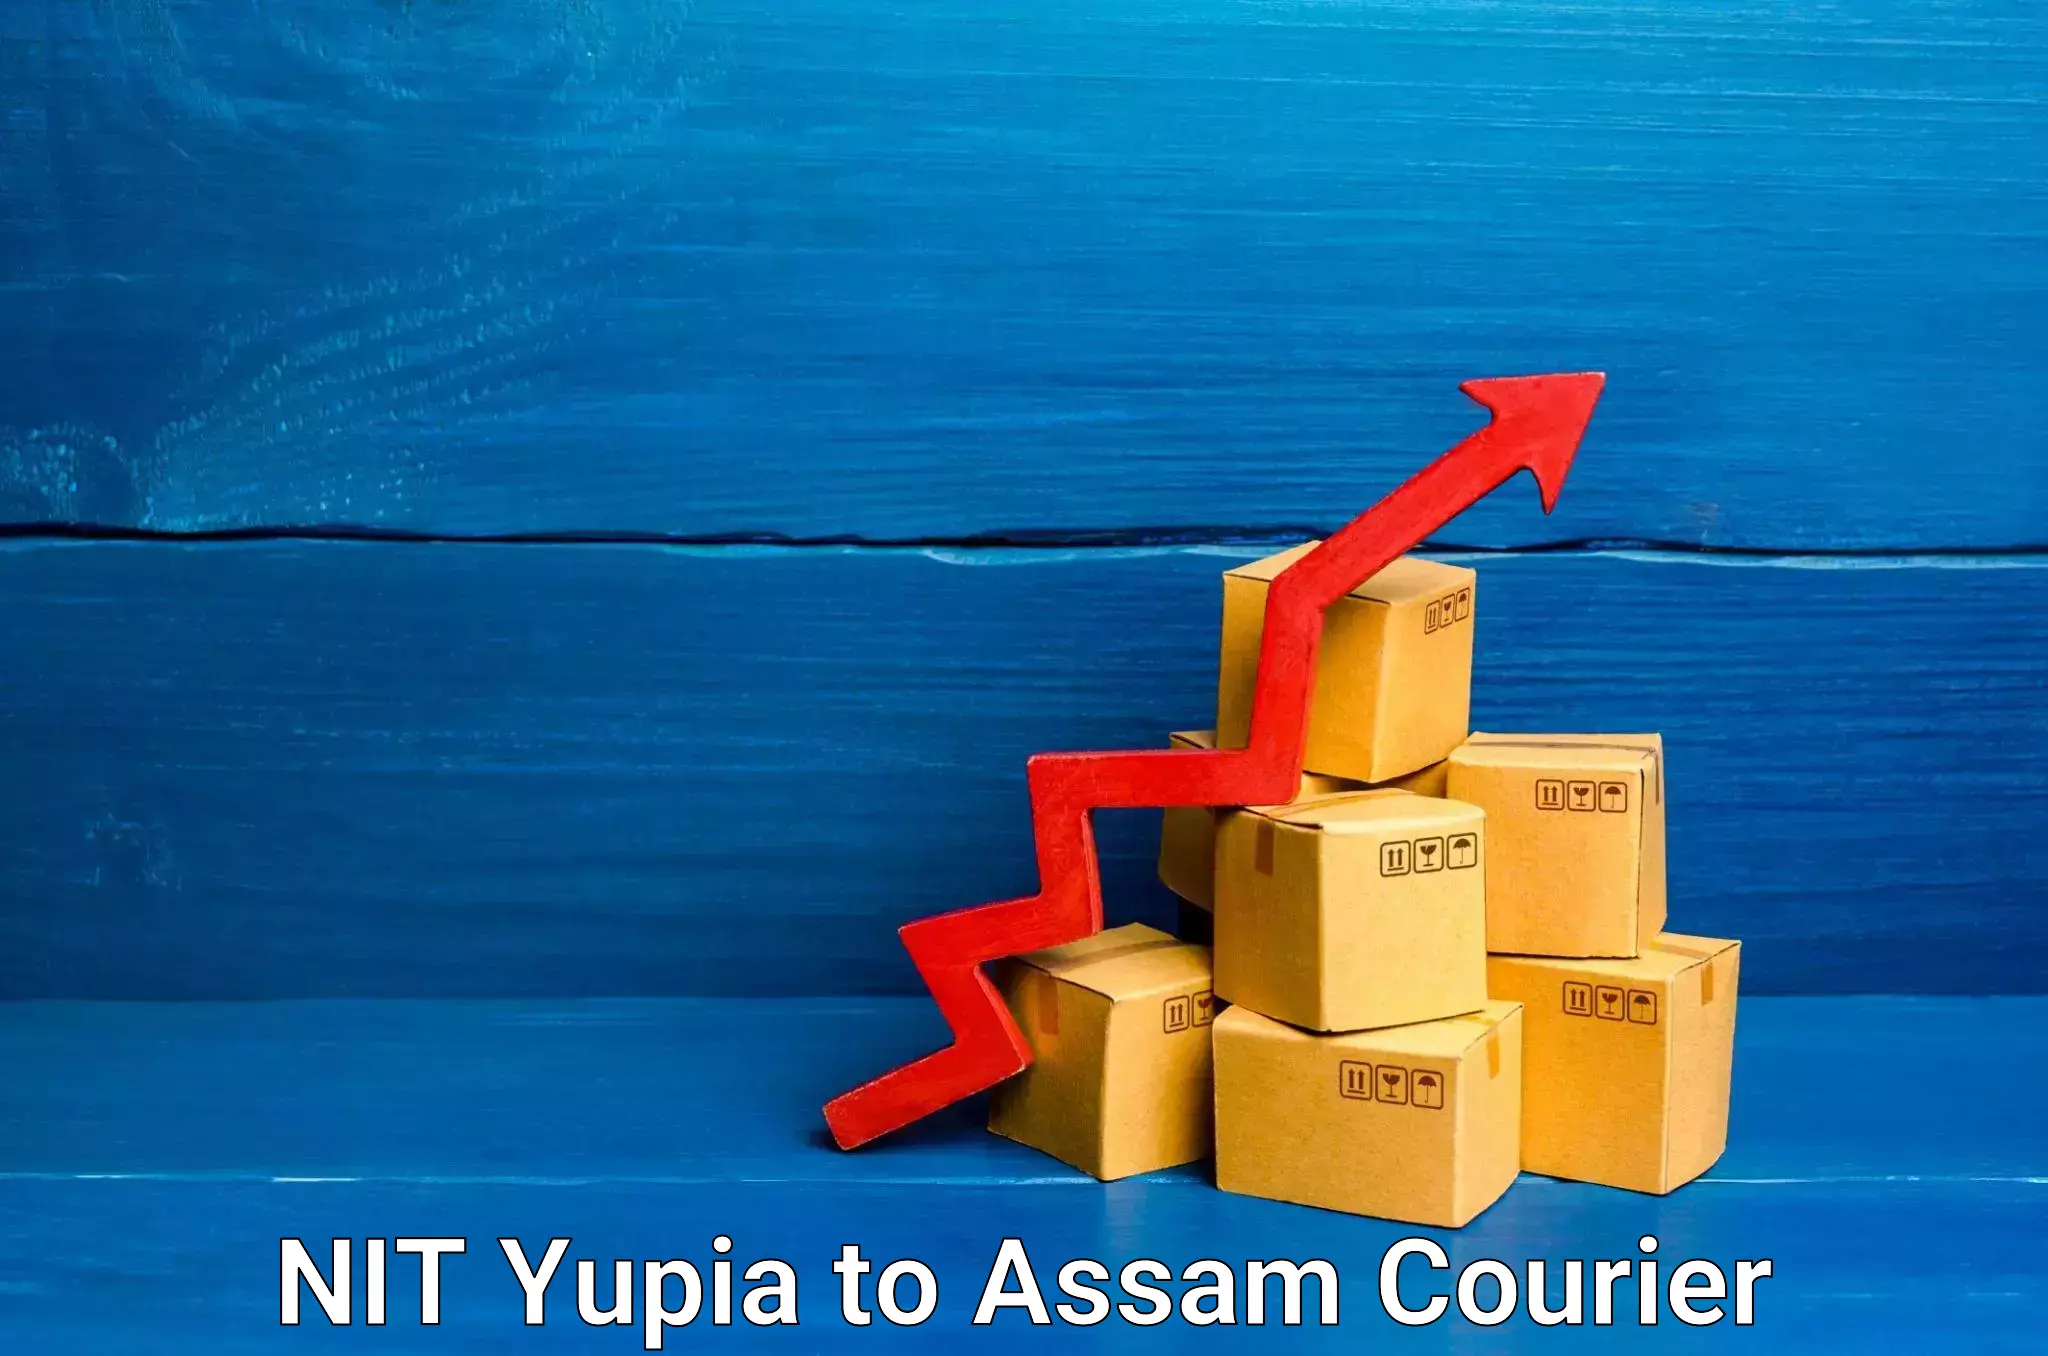 Next-day freight services NIT Yupia to Rupai Siding